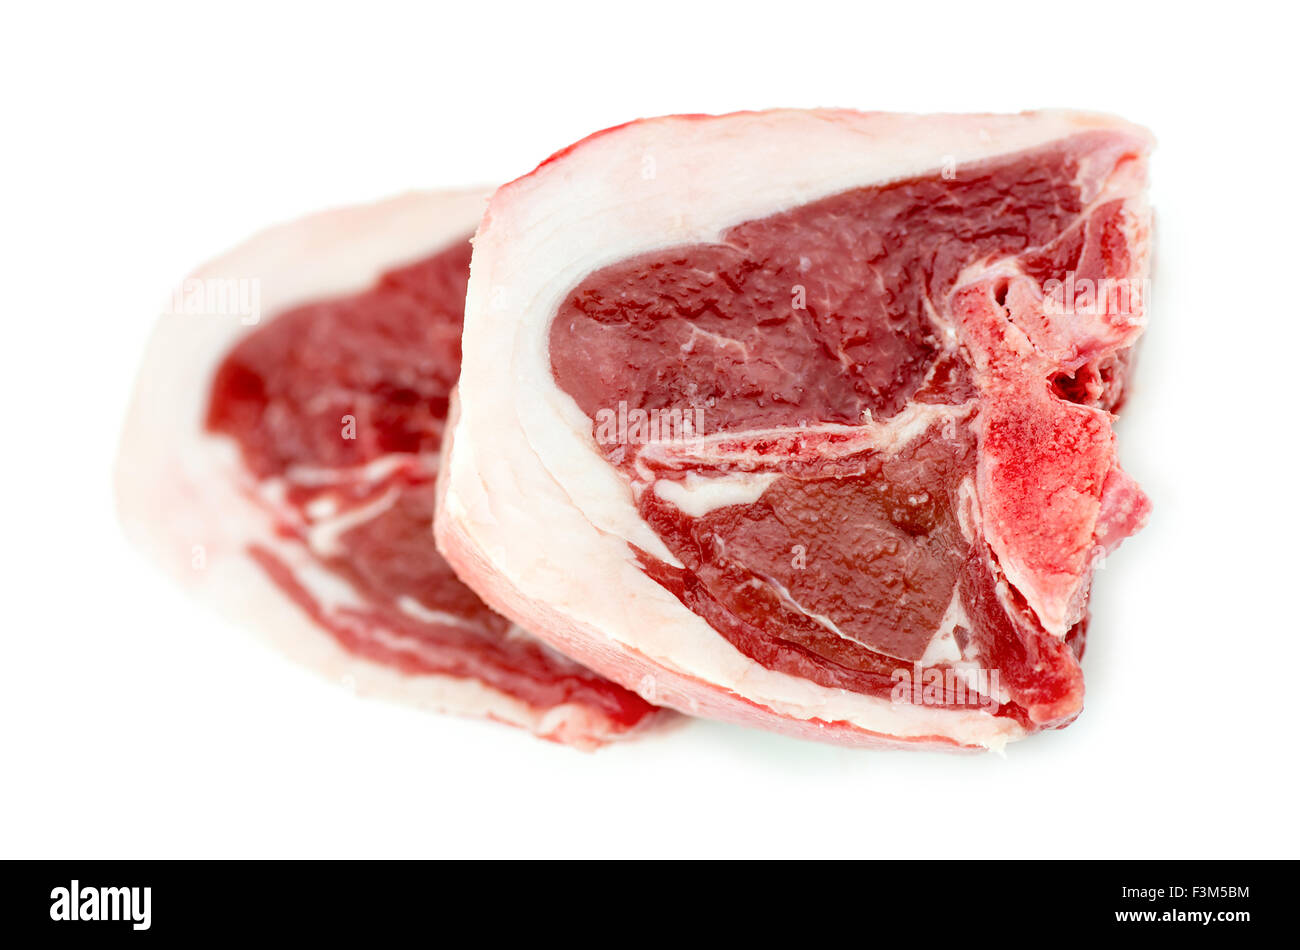 Uncooked red meat isolated lamb Stock Photo